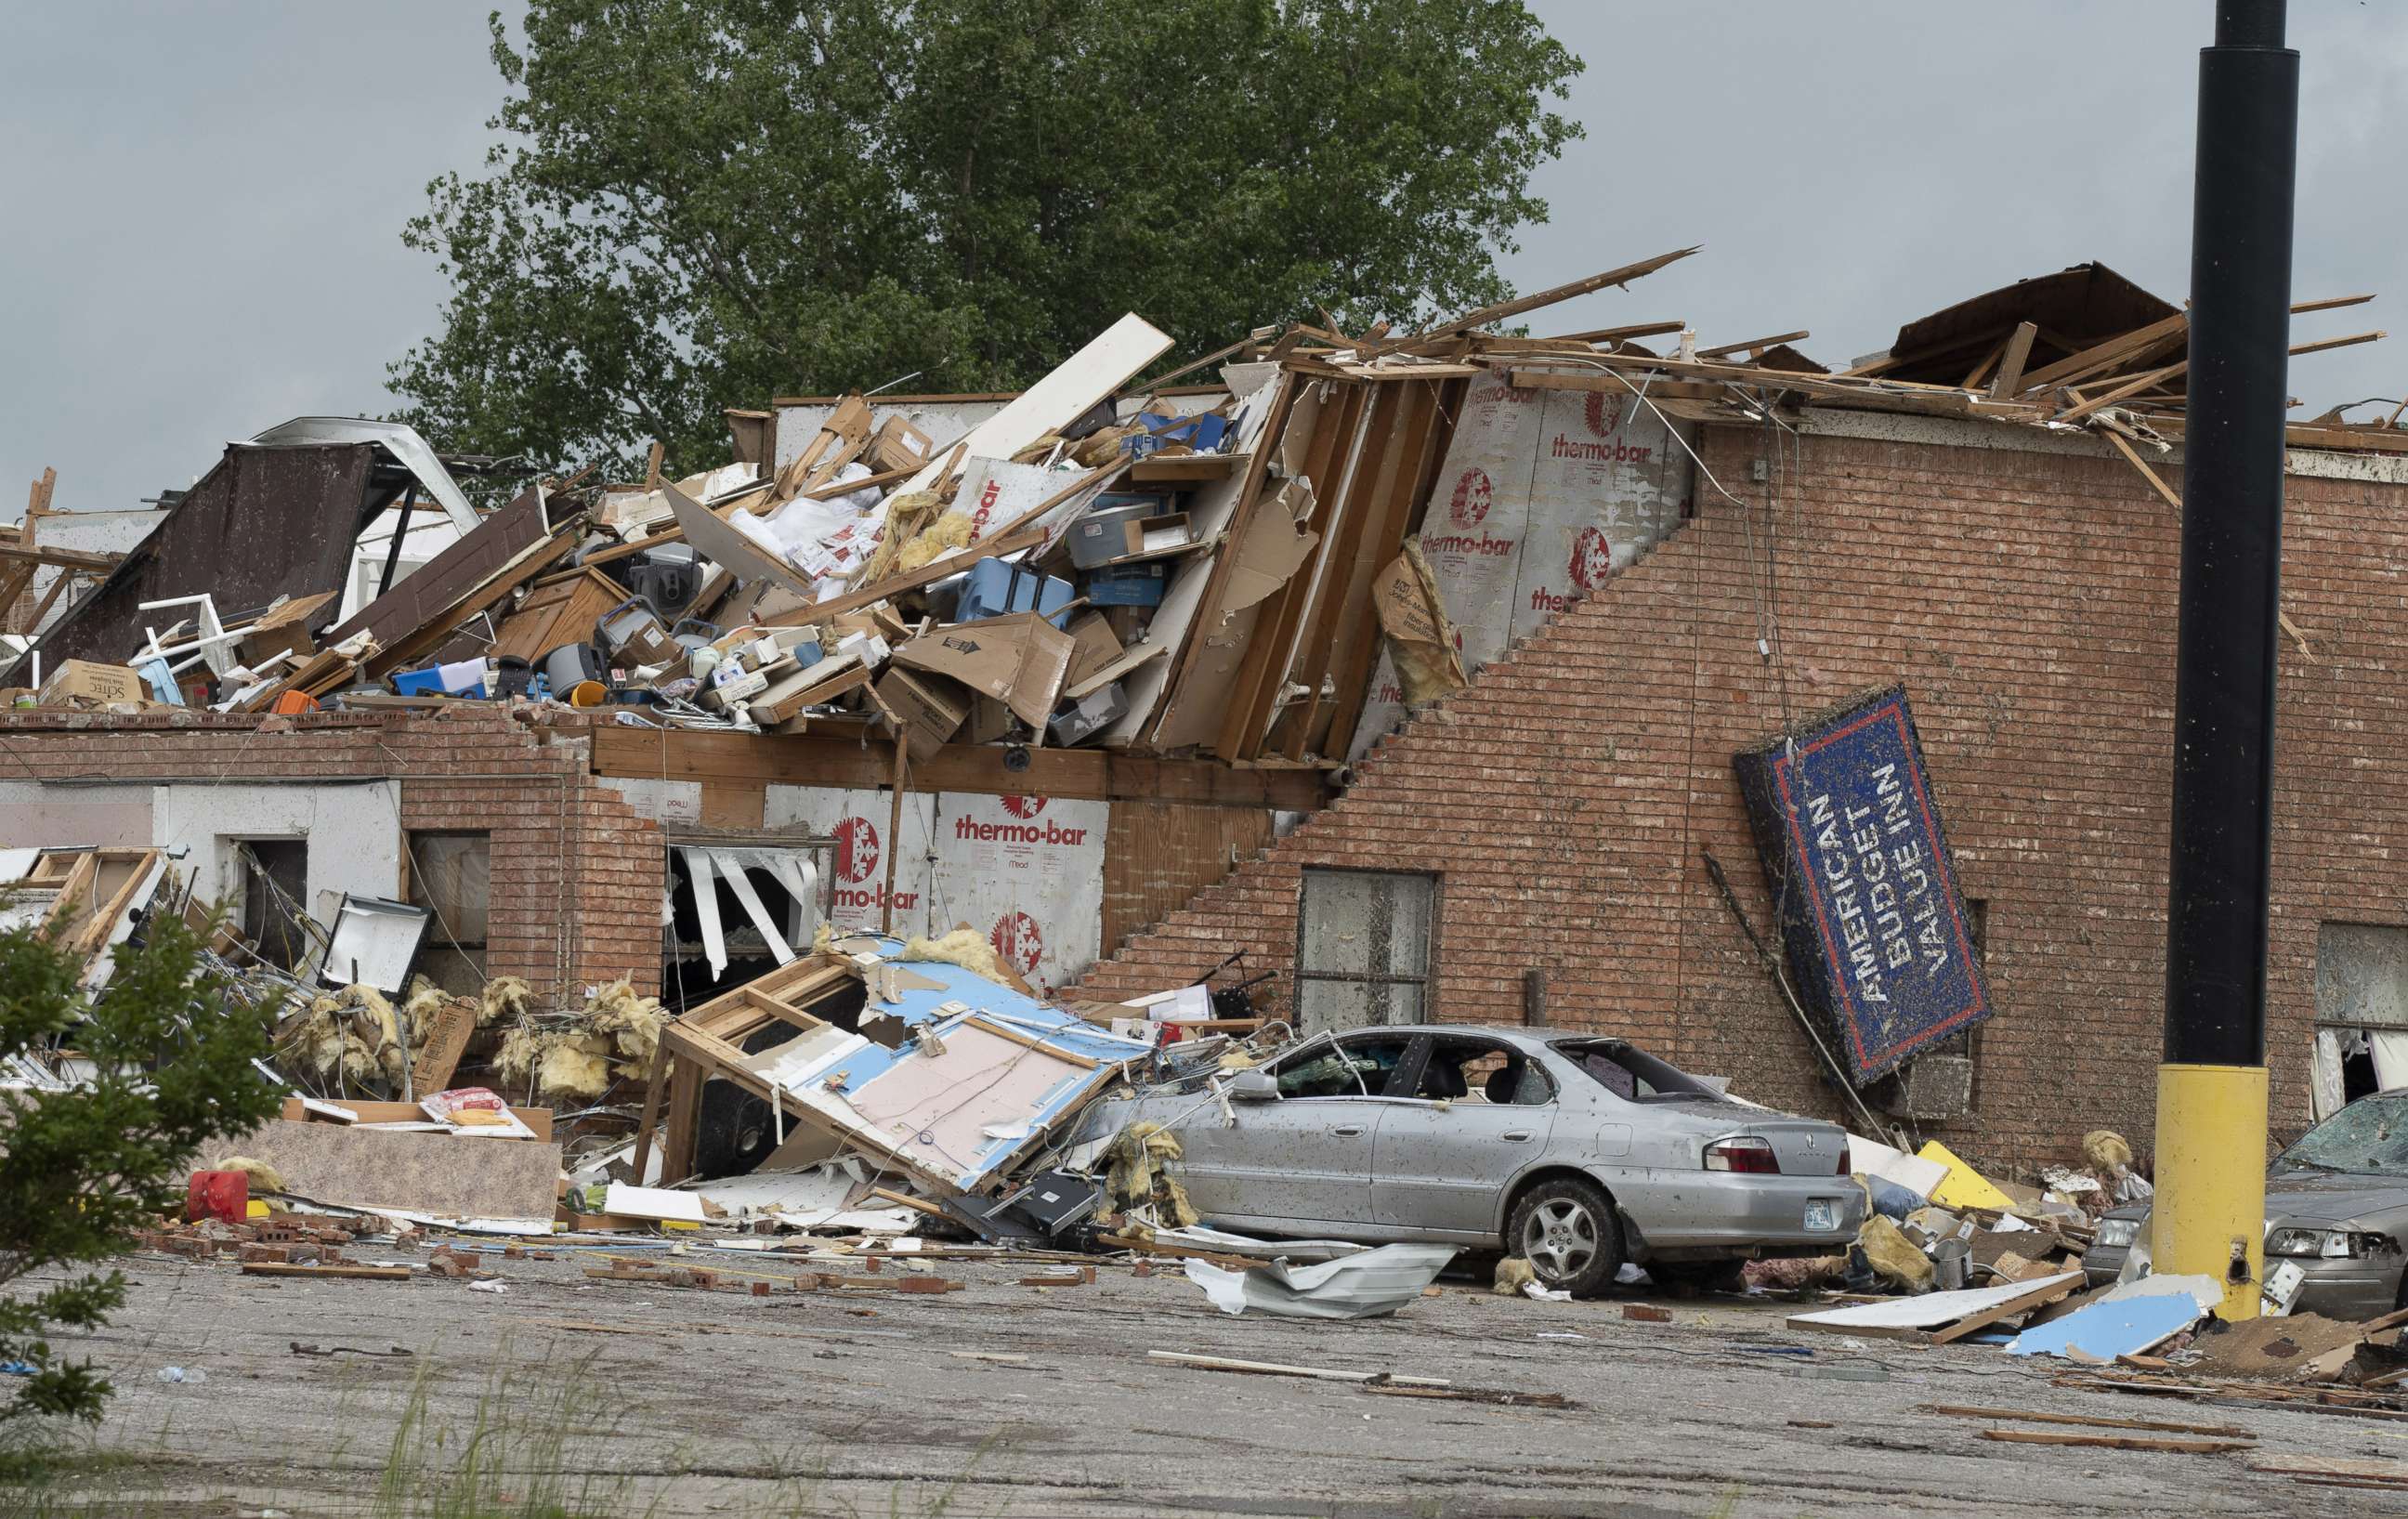 PHOTO: The American Budget Value Inn is shown all but flattened, May 26, 2019, in El Reno, Okla. 